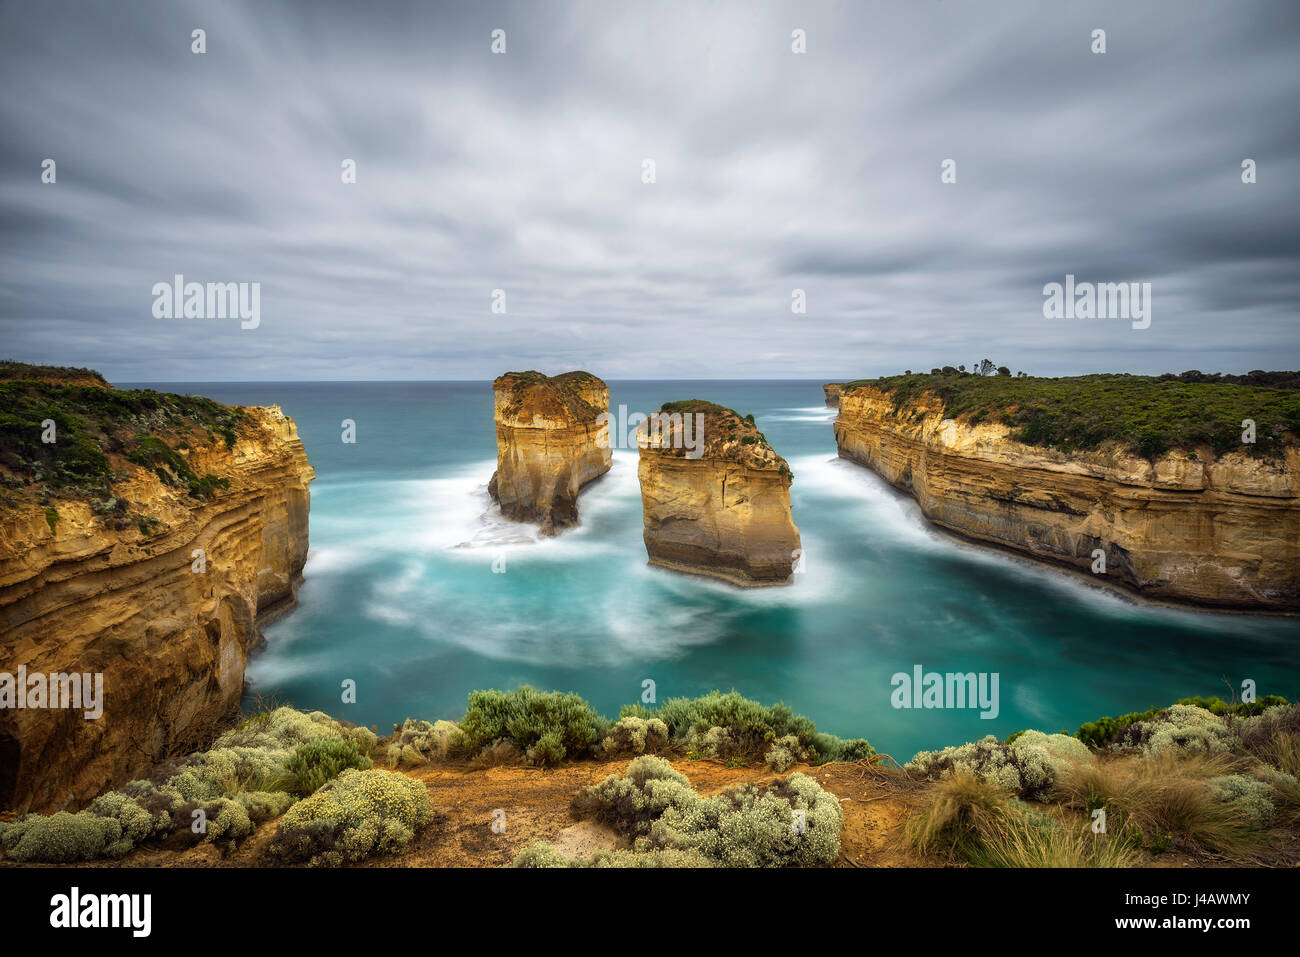 Loch Ard Gorge along the famous Great Ocean Road in Victoria, Australia, near Port Campbell and The Twelve Apostles. Long exposure. Stock Photo